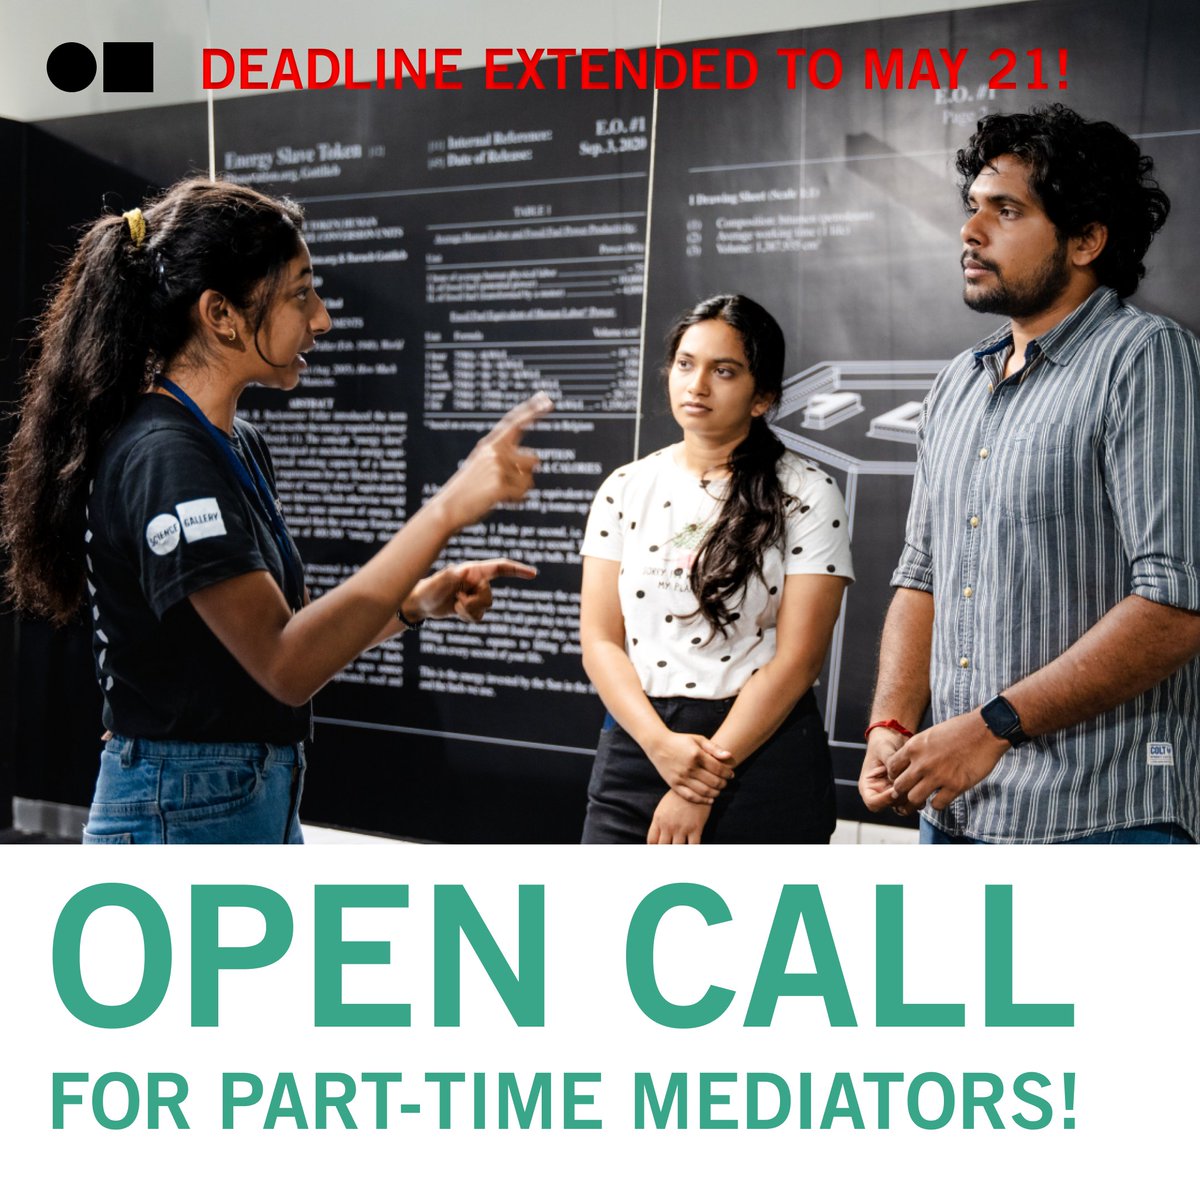 Need more time to apply for our part-time Mediator programme?

We've extended the last date to apply to May 21!

Send in your application soon! Link below:
tr.ee/9hgAUNtUB6

 #mediators #publicengagement #research #bengalurujobs #sic #interdisciplinary #publicengagement